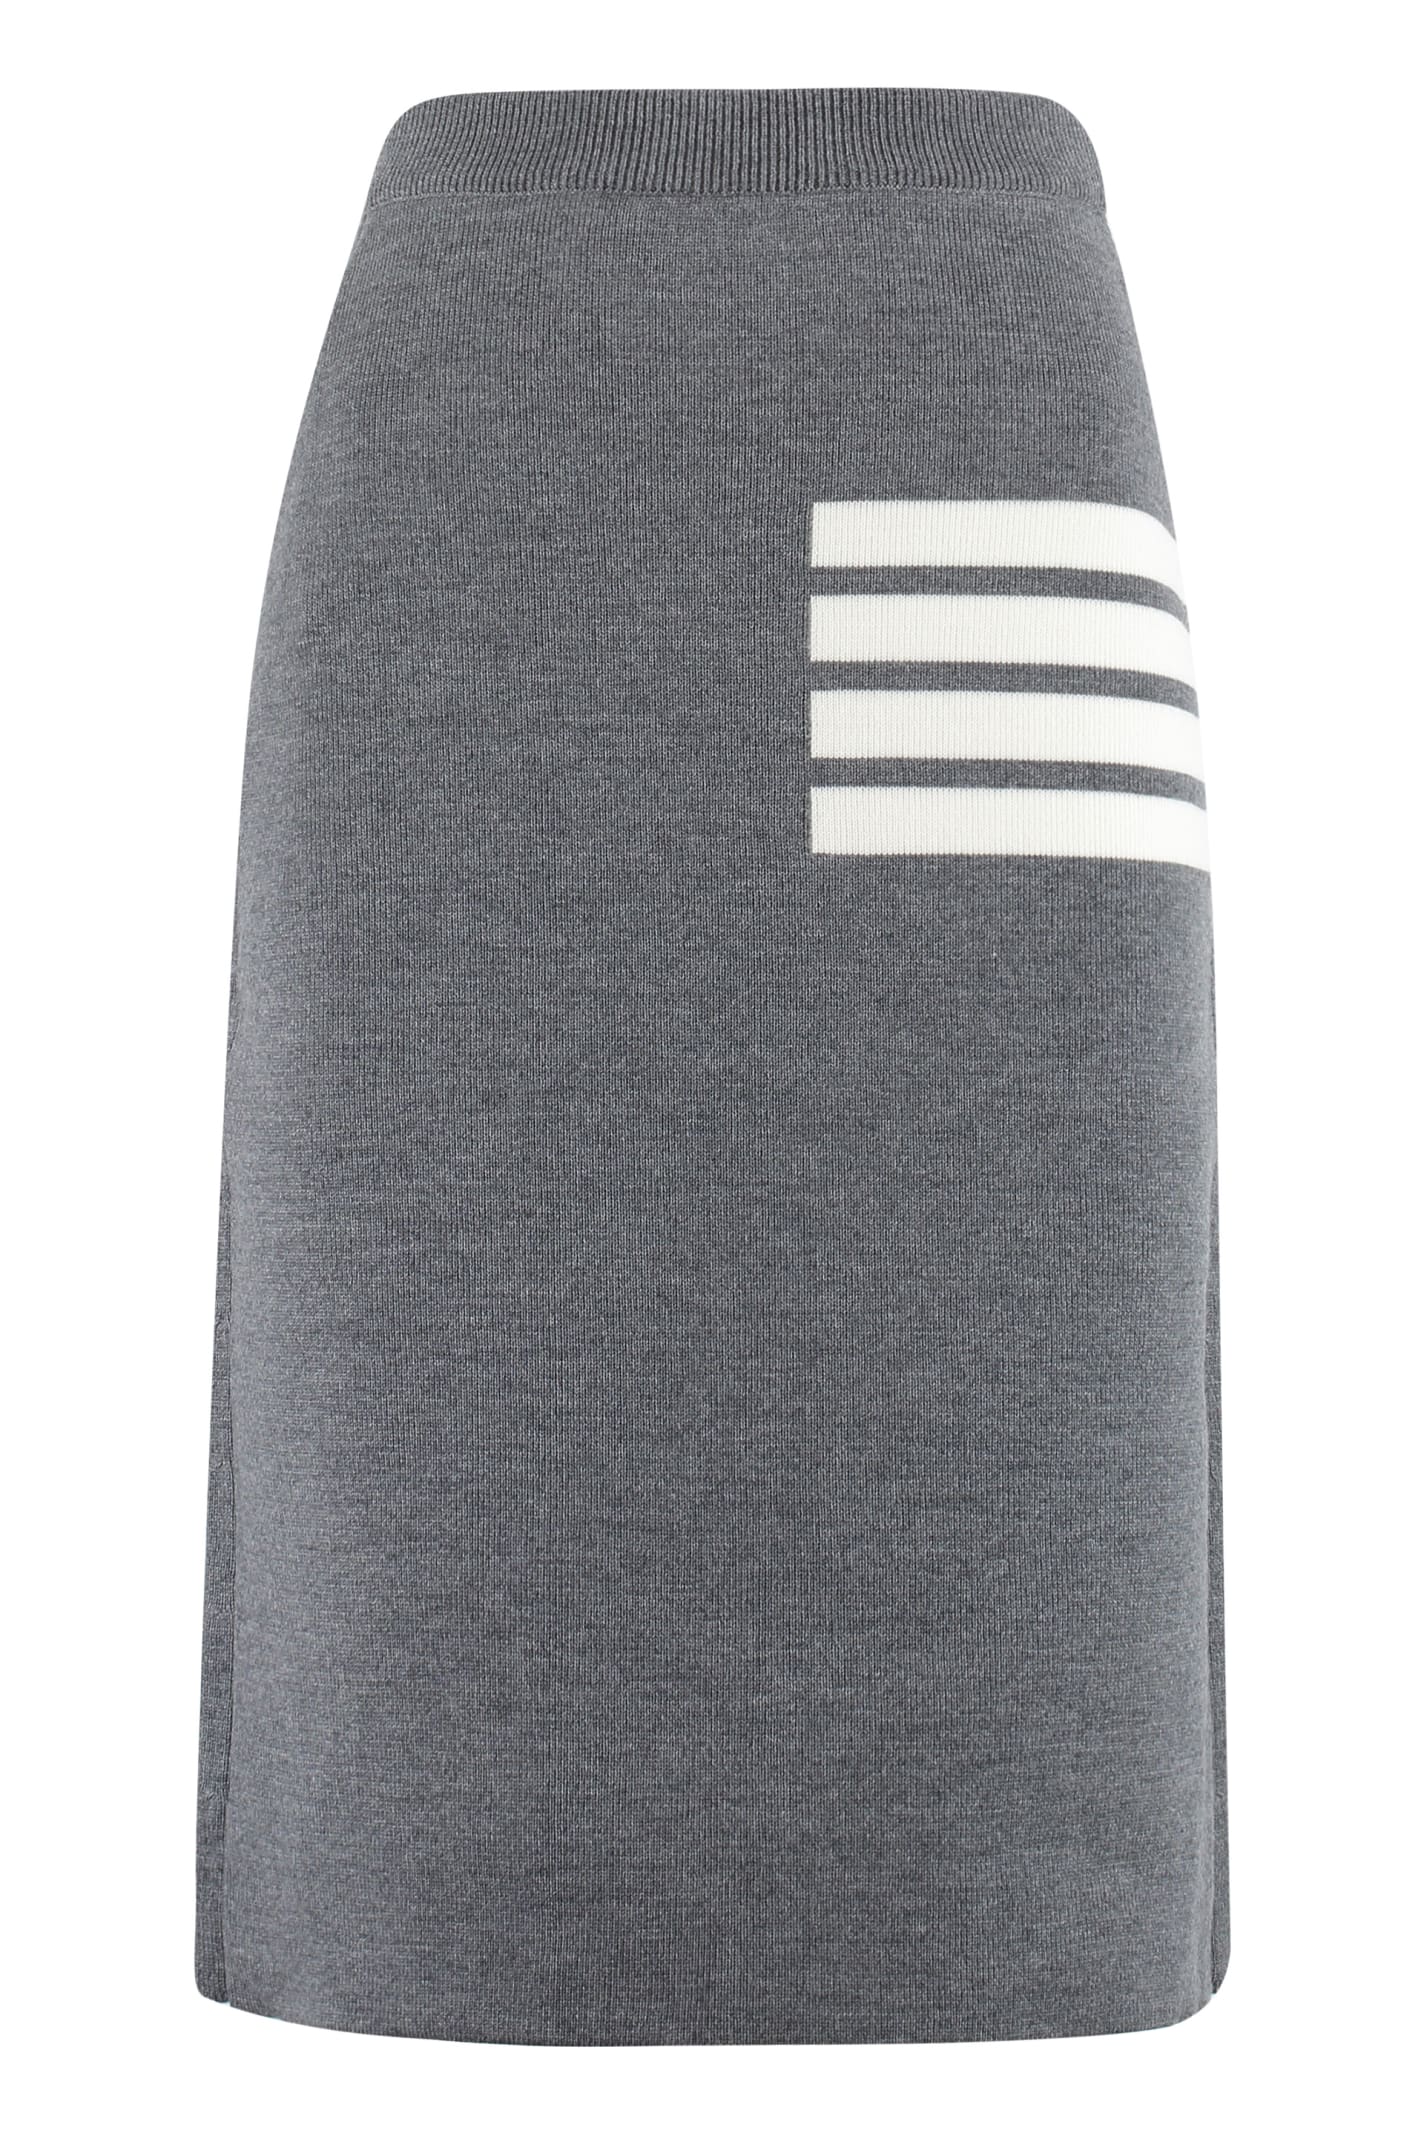 Thom Browne Knit Pencil Skirt In Grey | ModeSens